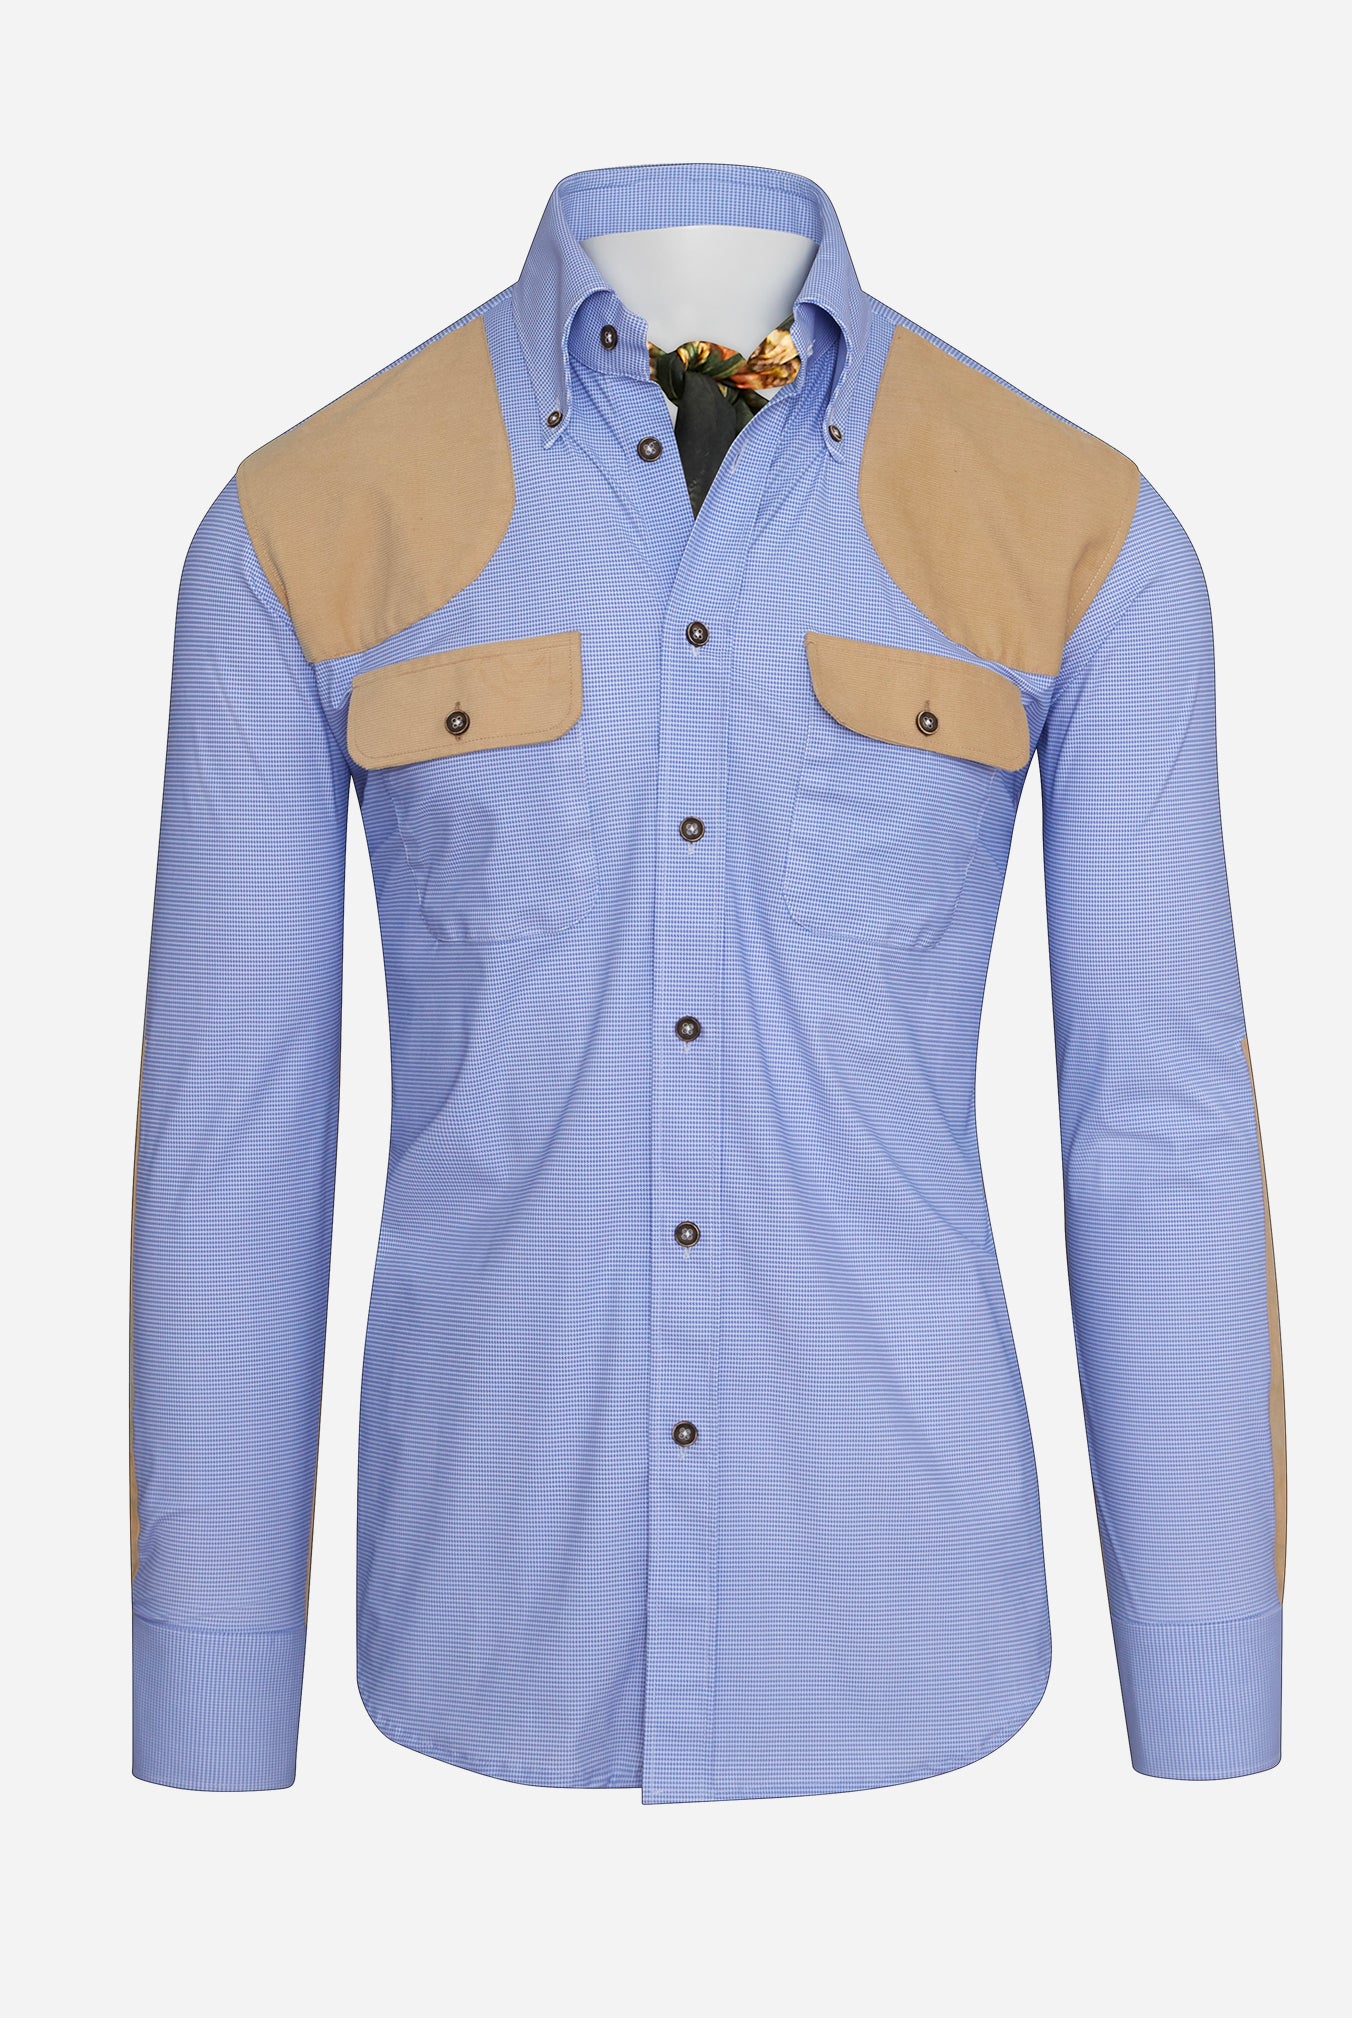 CDC Performance Field Shirt in Blue with Tan